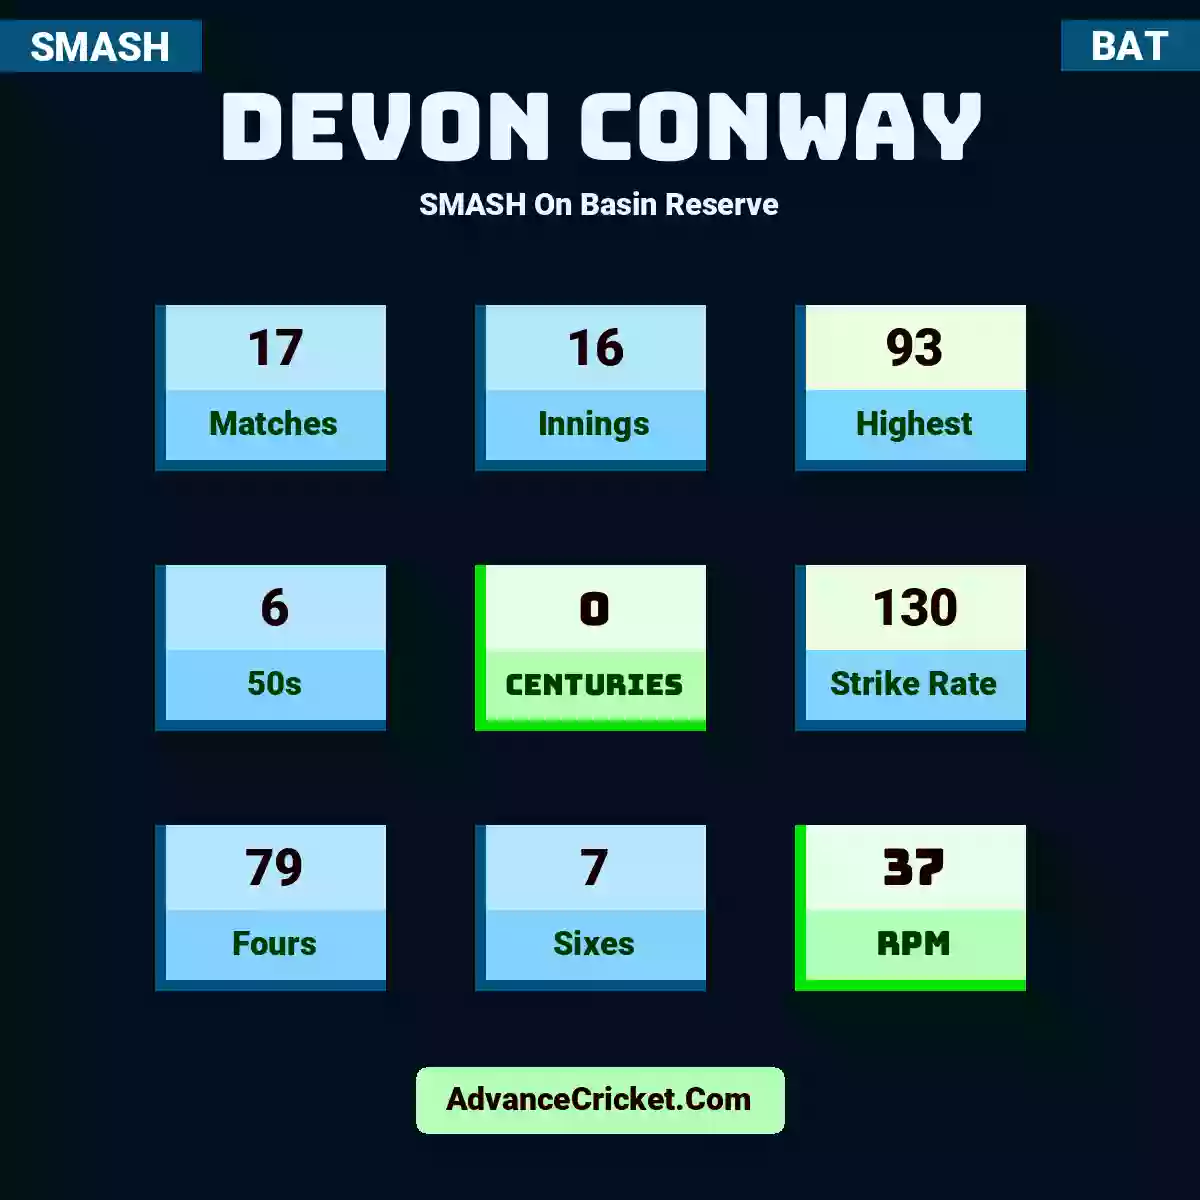 Devon Conway SMASH  On Basin Reserve, Devon Conway played 17 matches, scored 93 runs as highest, 6 half-centuries, and 0 centuries, with a strike rate of 130. D.Conway hit 79 fours and 7 sixes, with an RPM of 37.